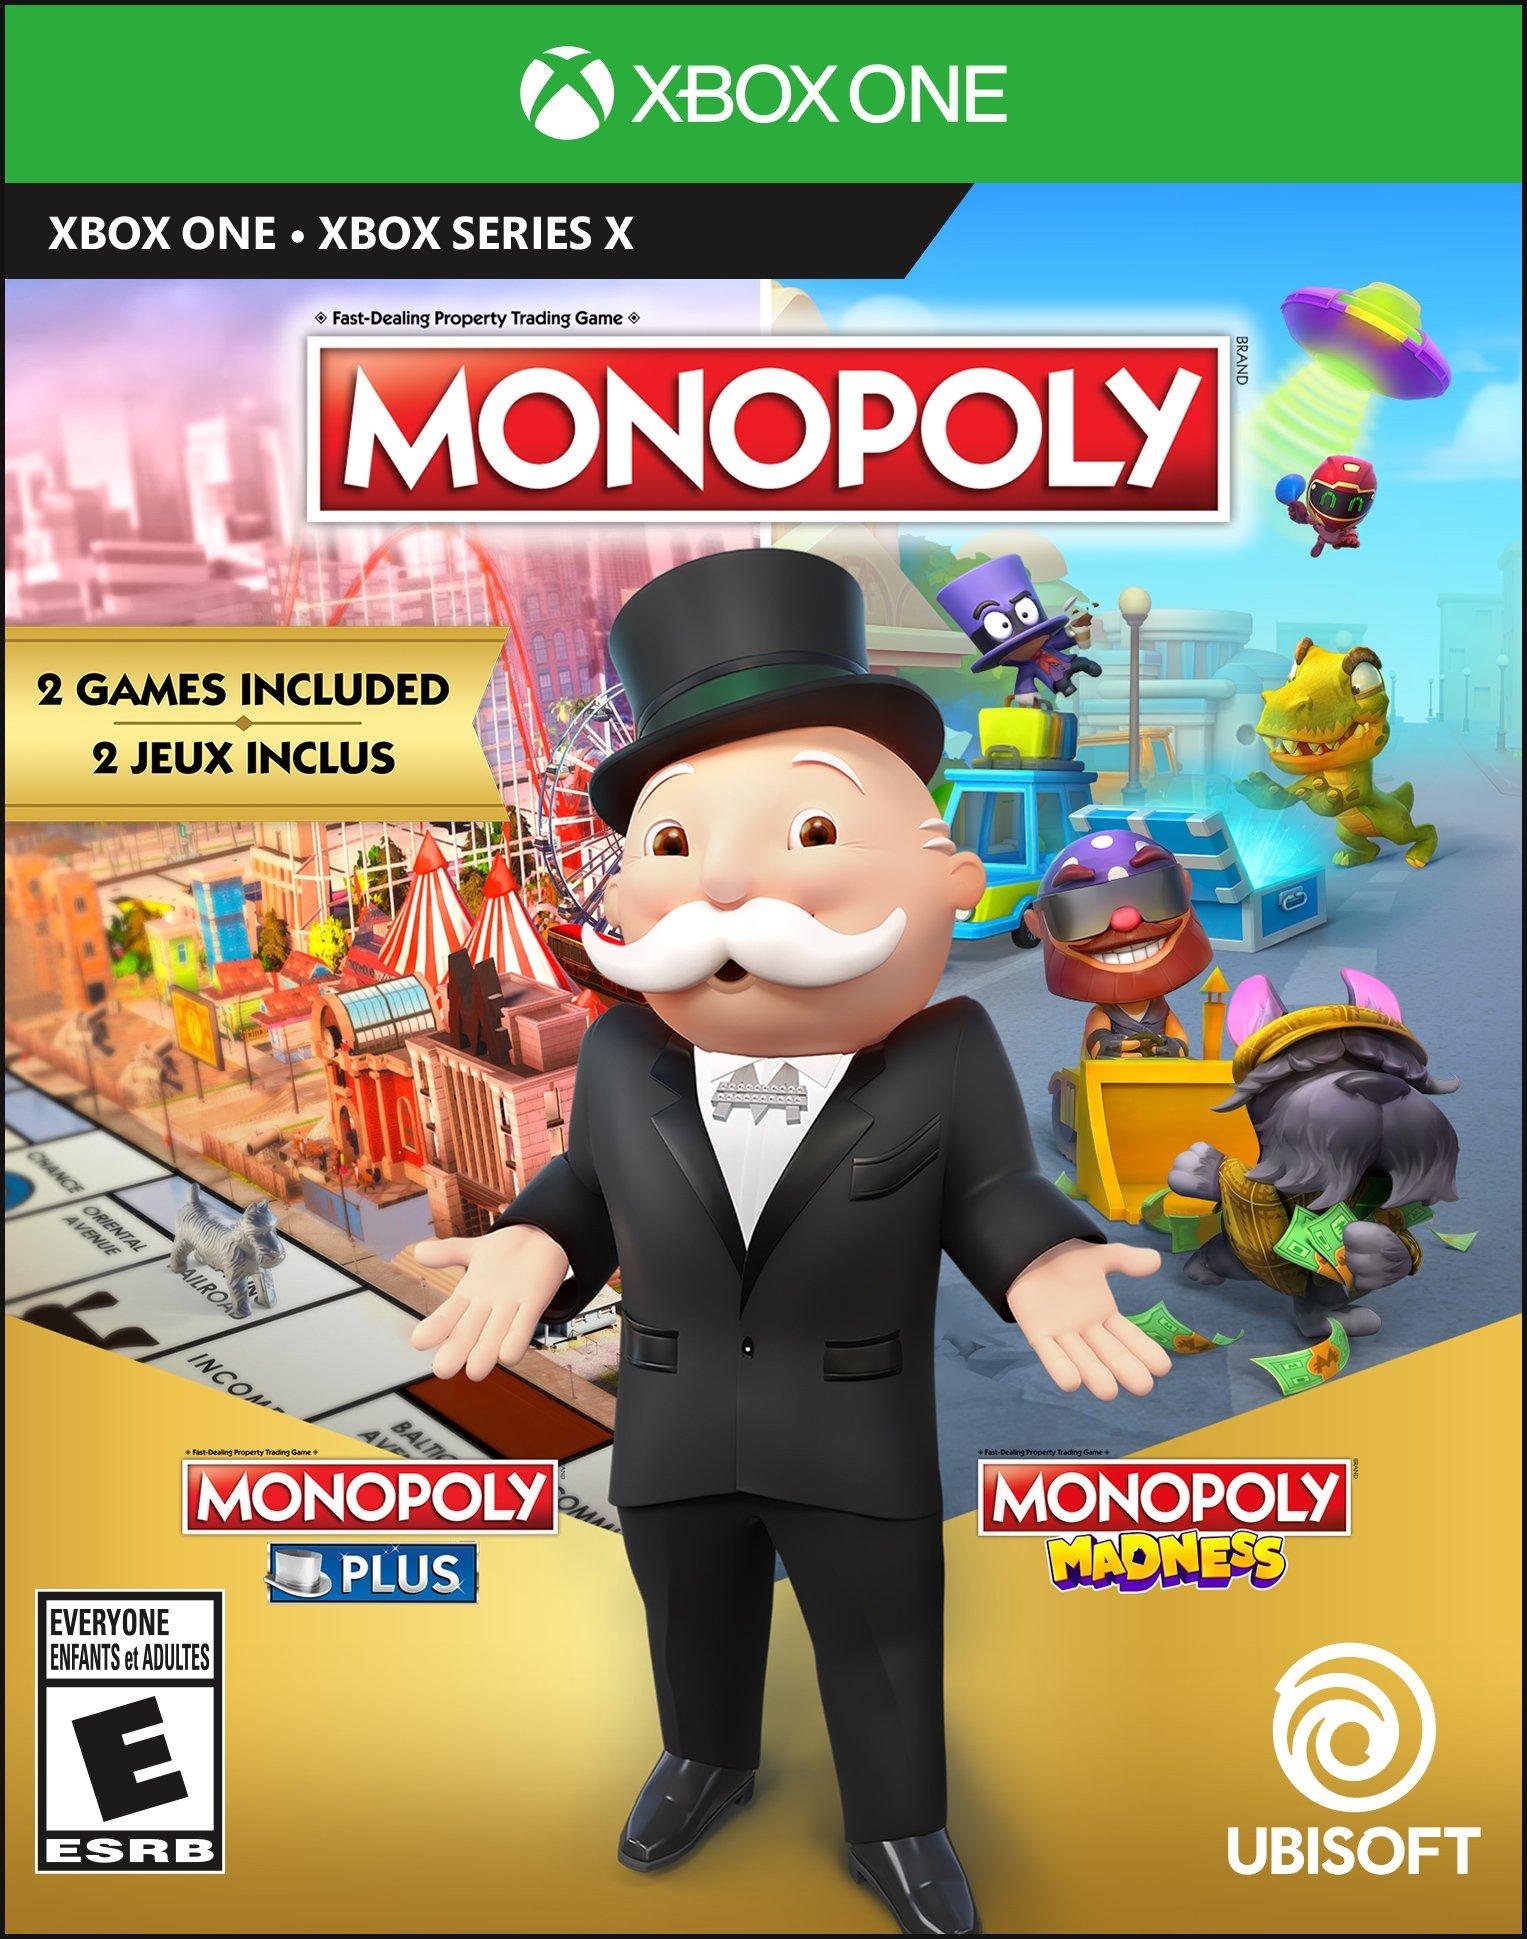 Madness GameStop Xbox Monopoly Plus Monopoly and One | Xbox - One |